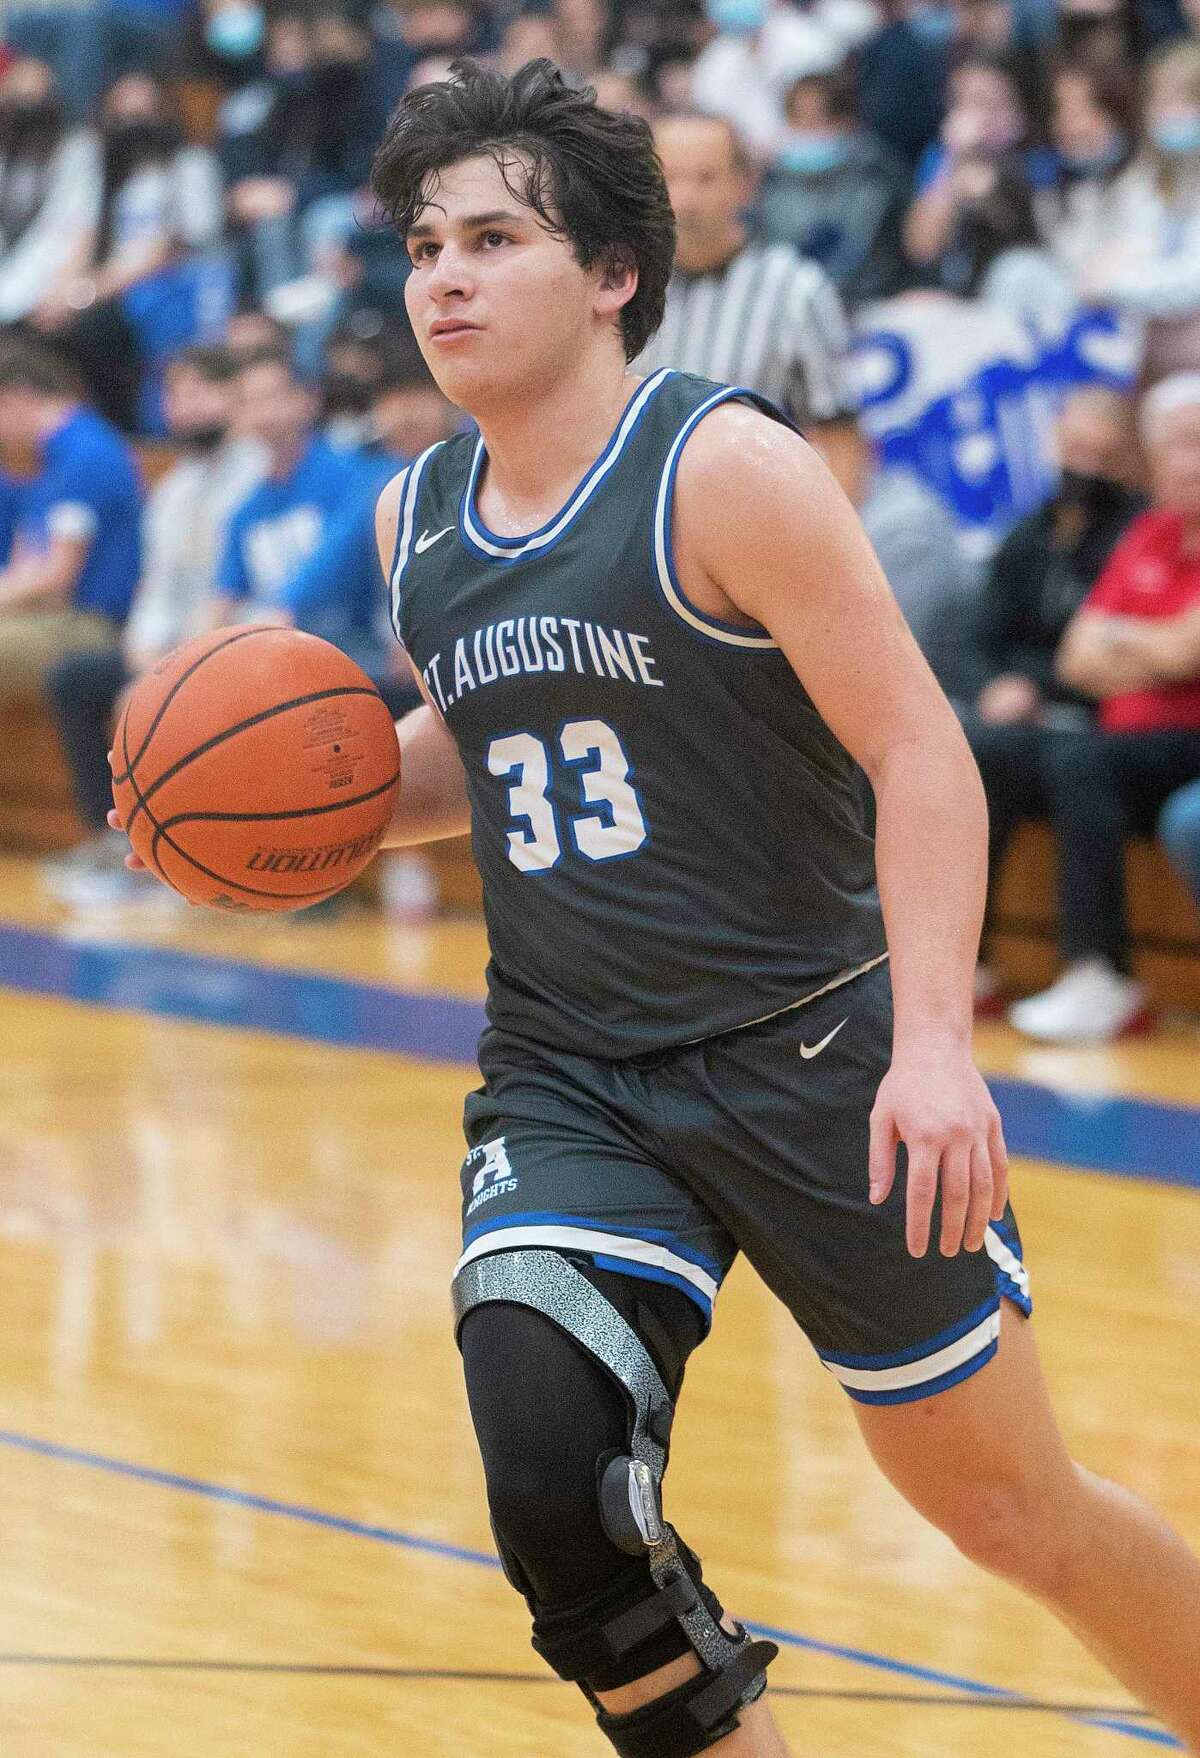 St. Augustine’s Estevan Barrientos felt good in his return to the court Friday after missing all of last season due to injury.